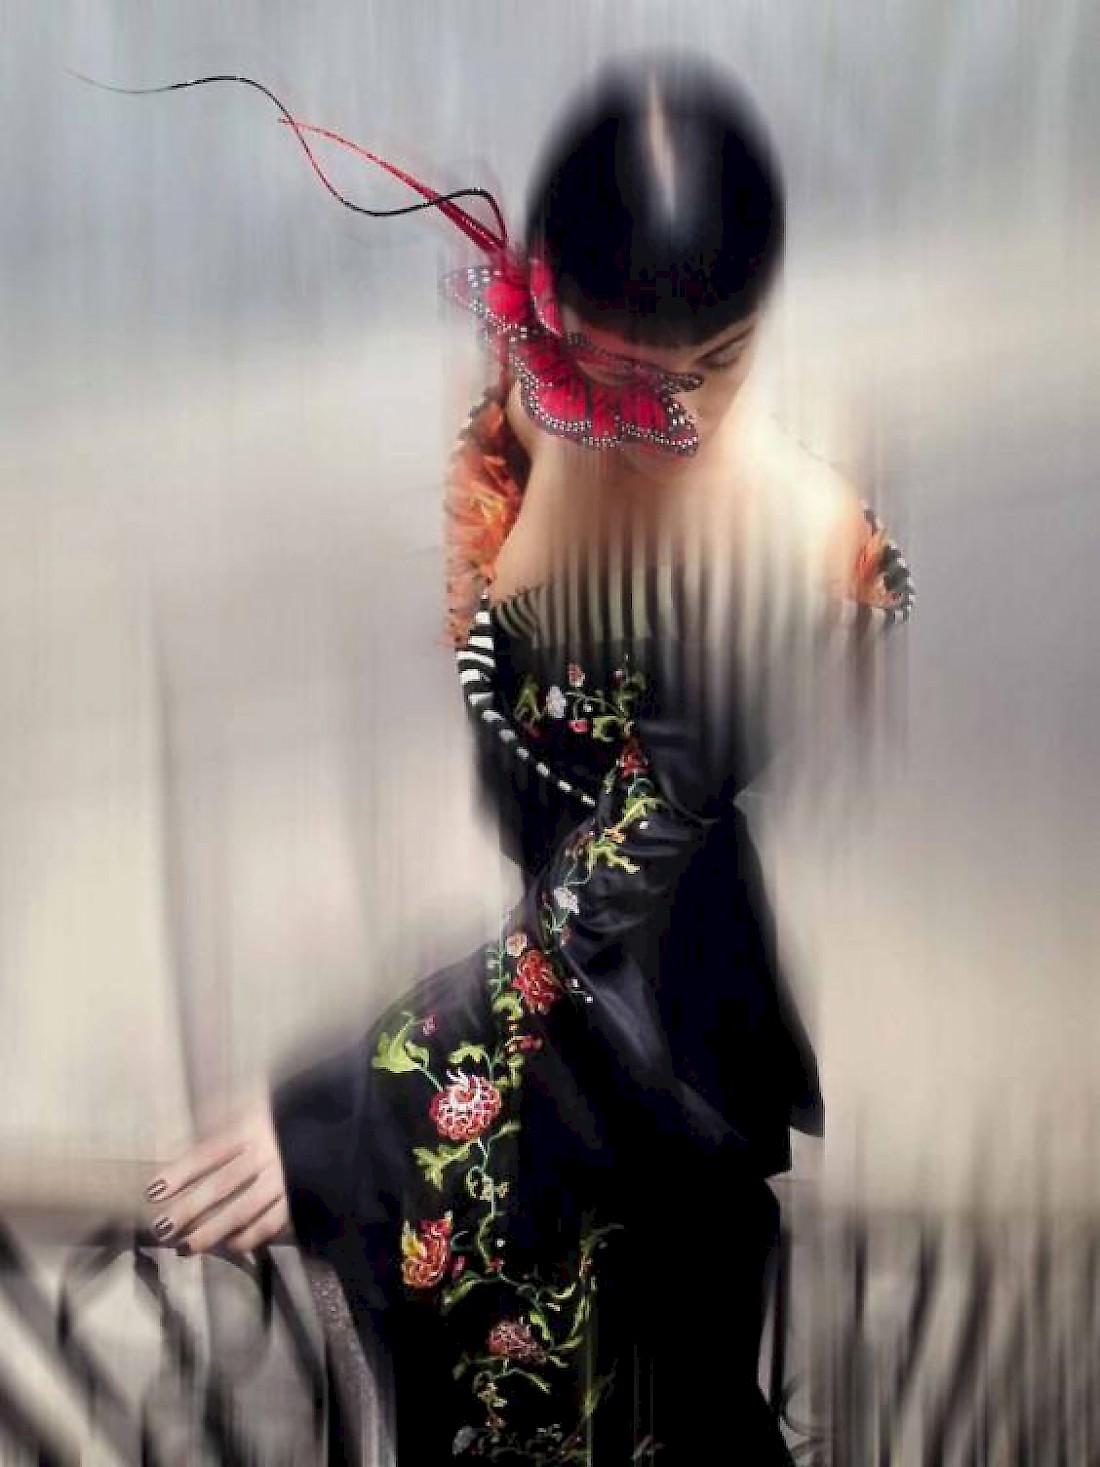 nick-knight-interview-pioneer-on-why-he-doesnt-want-to-be-called-a-photographer-38946-kb.1100x0.jpg